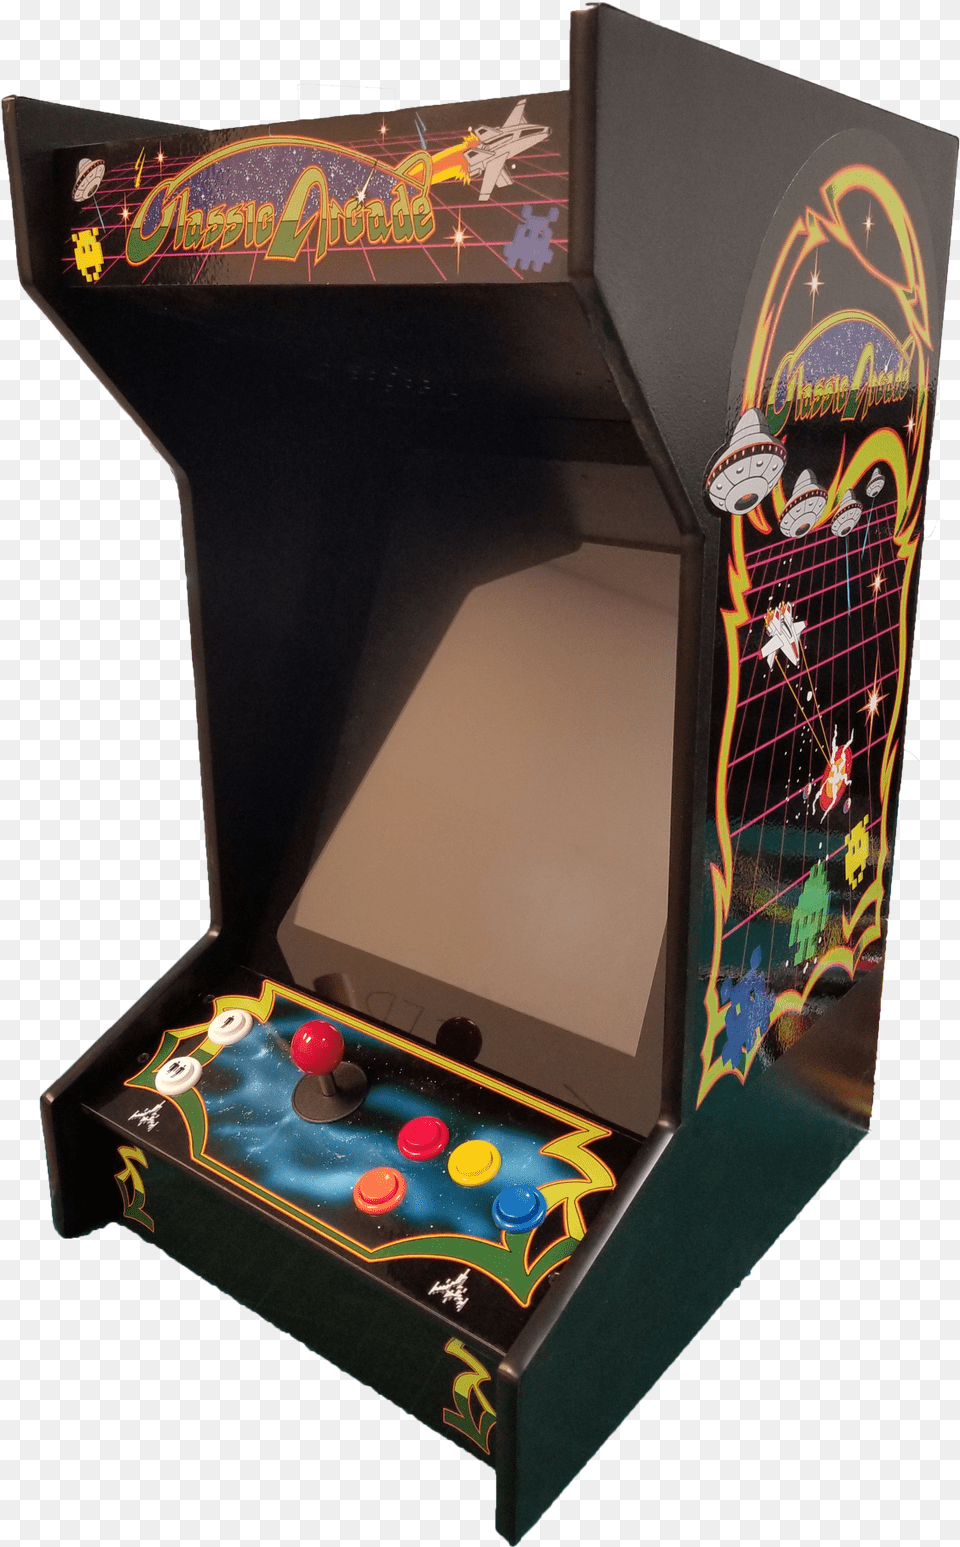 Video Game Arcade Cabinet Png